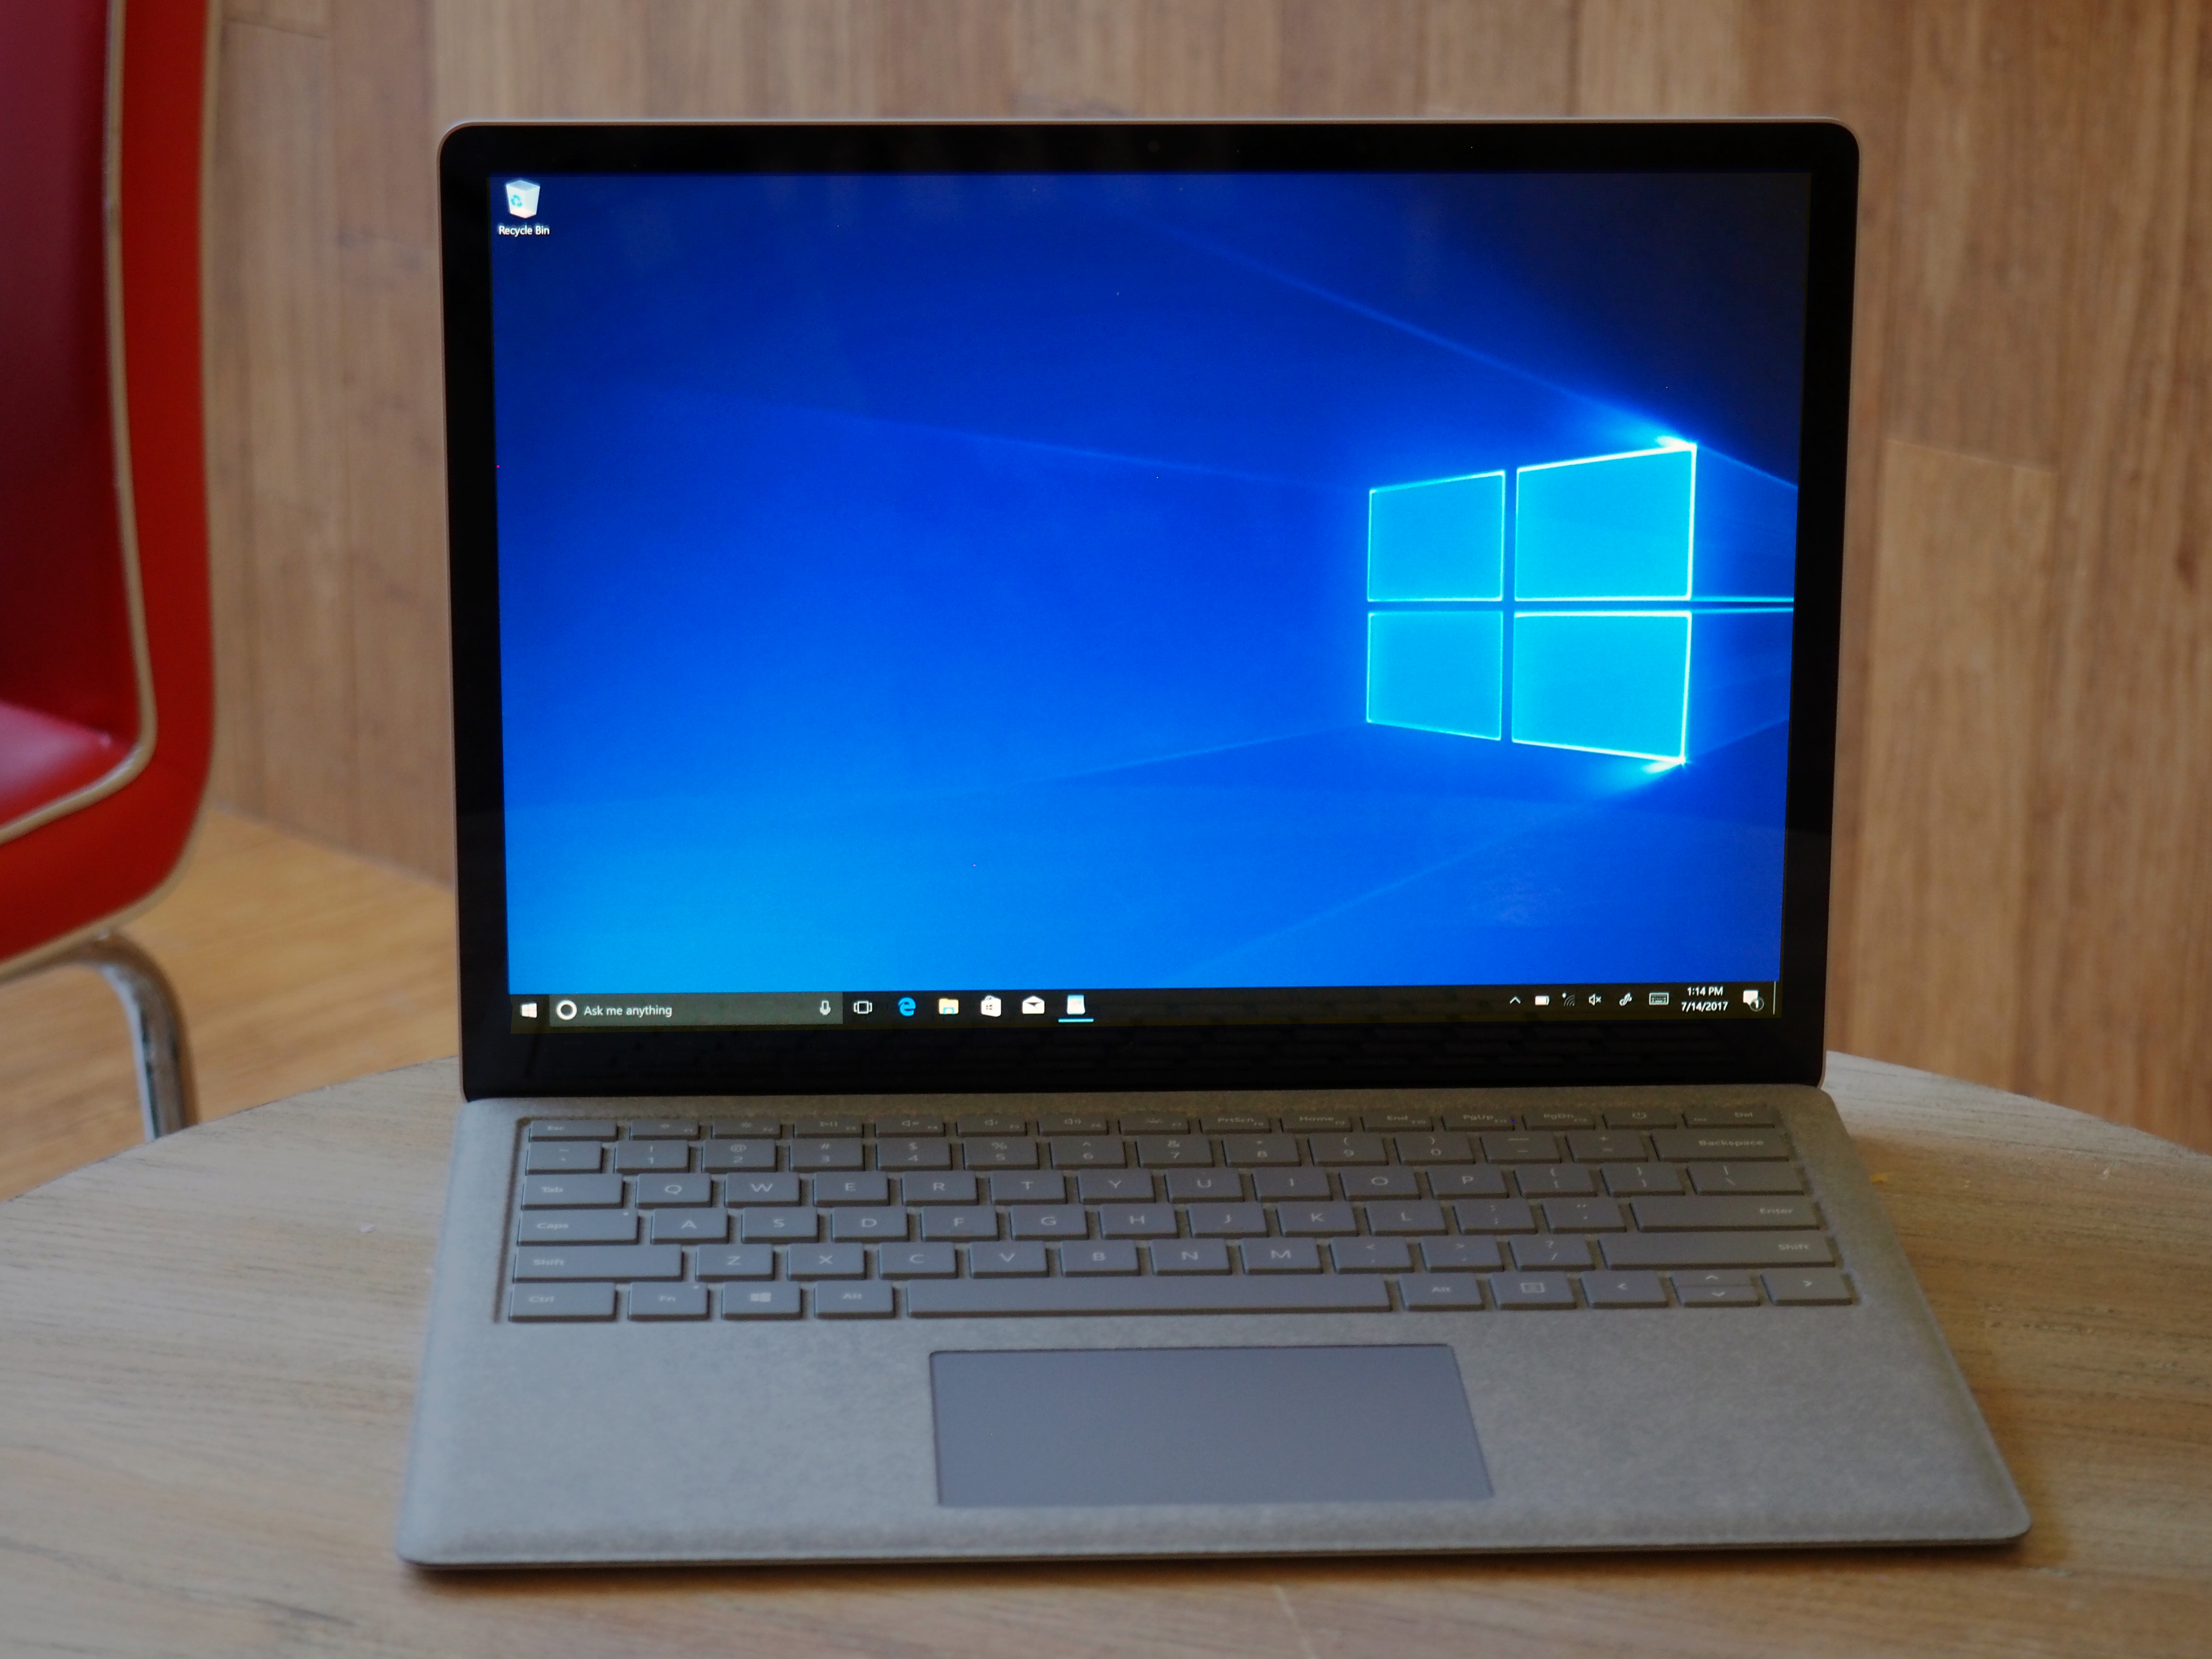 Microsoft's Surface Laptop is great, once you upgrade Windows 10 S